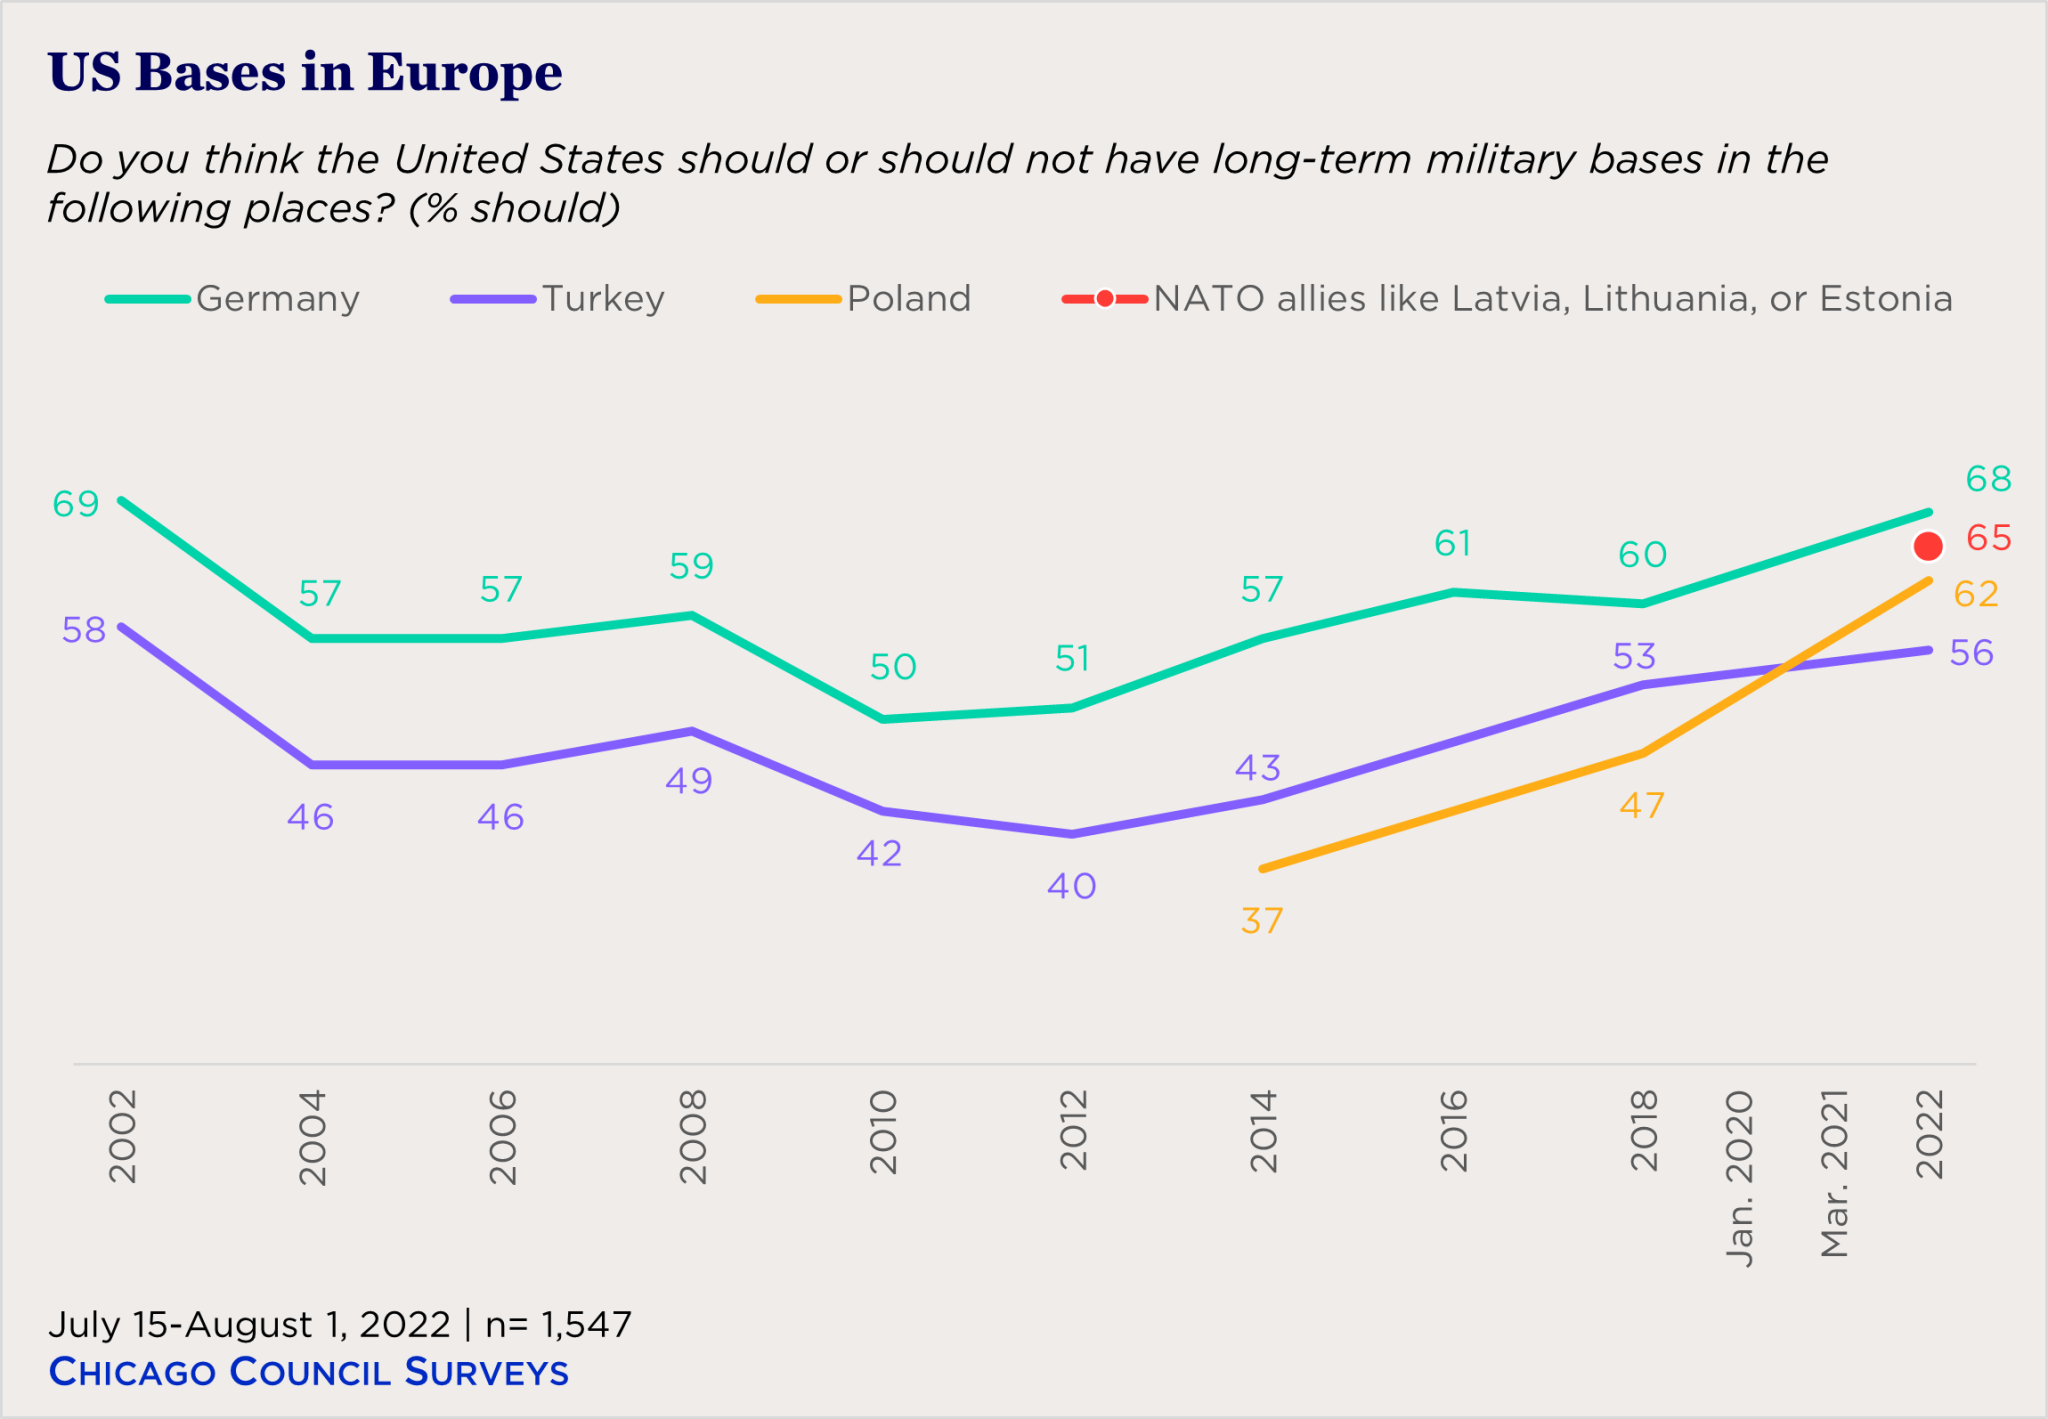 "Line graph showing support for bases in Europe"